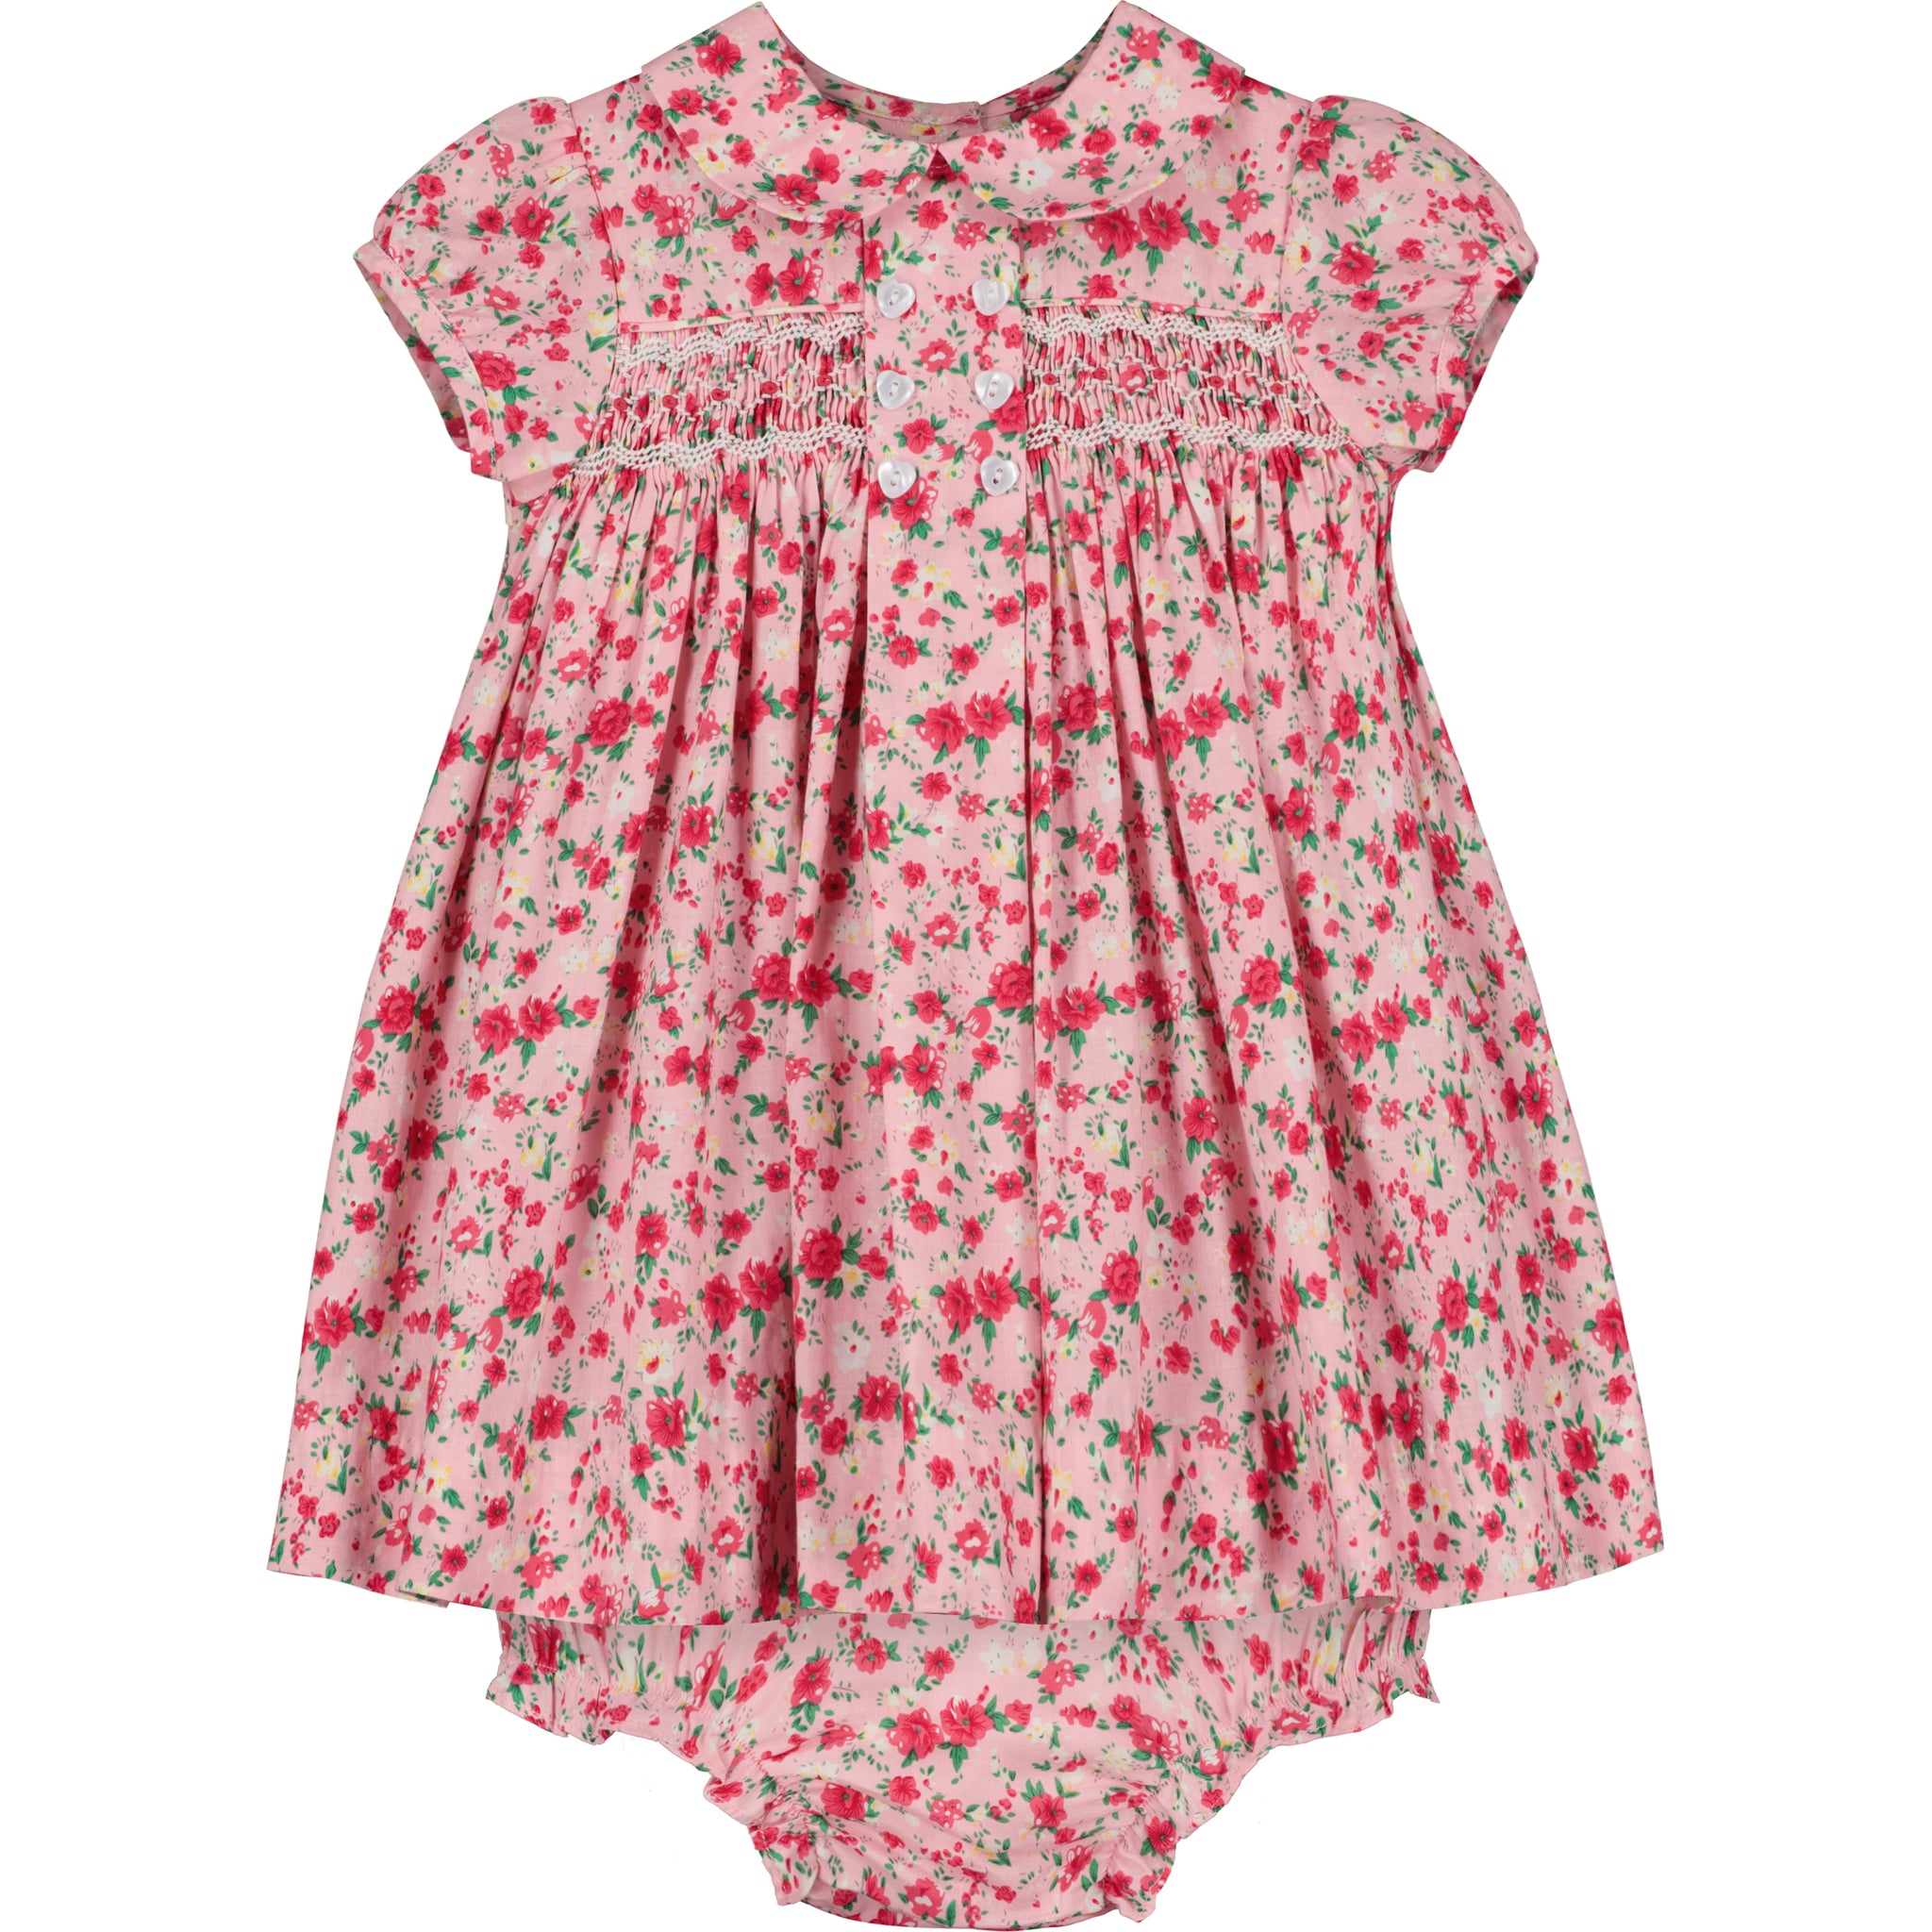 pink floral smock dress for baby, button front and matching bloomers